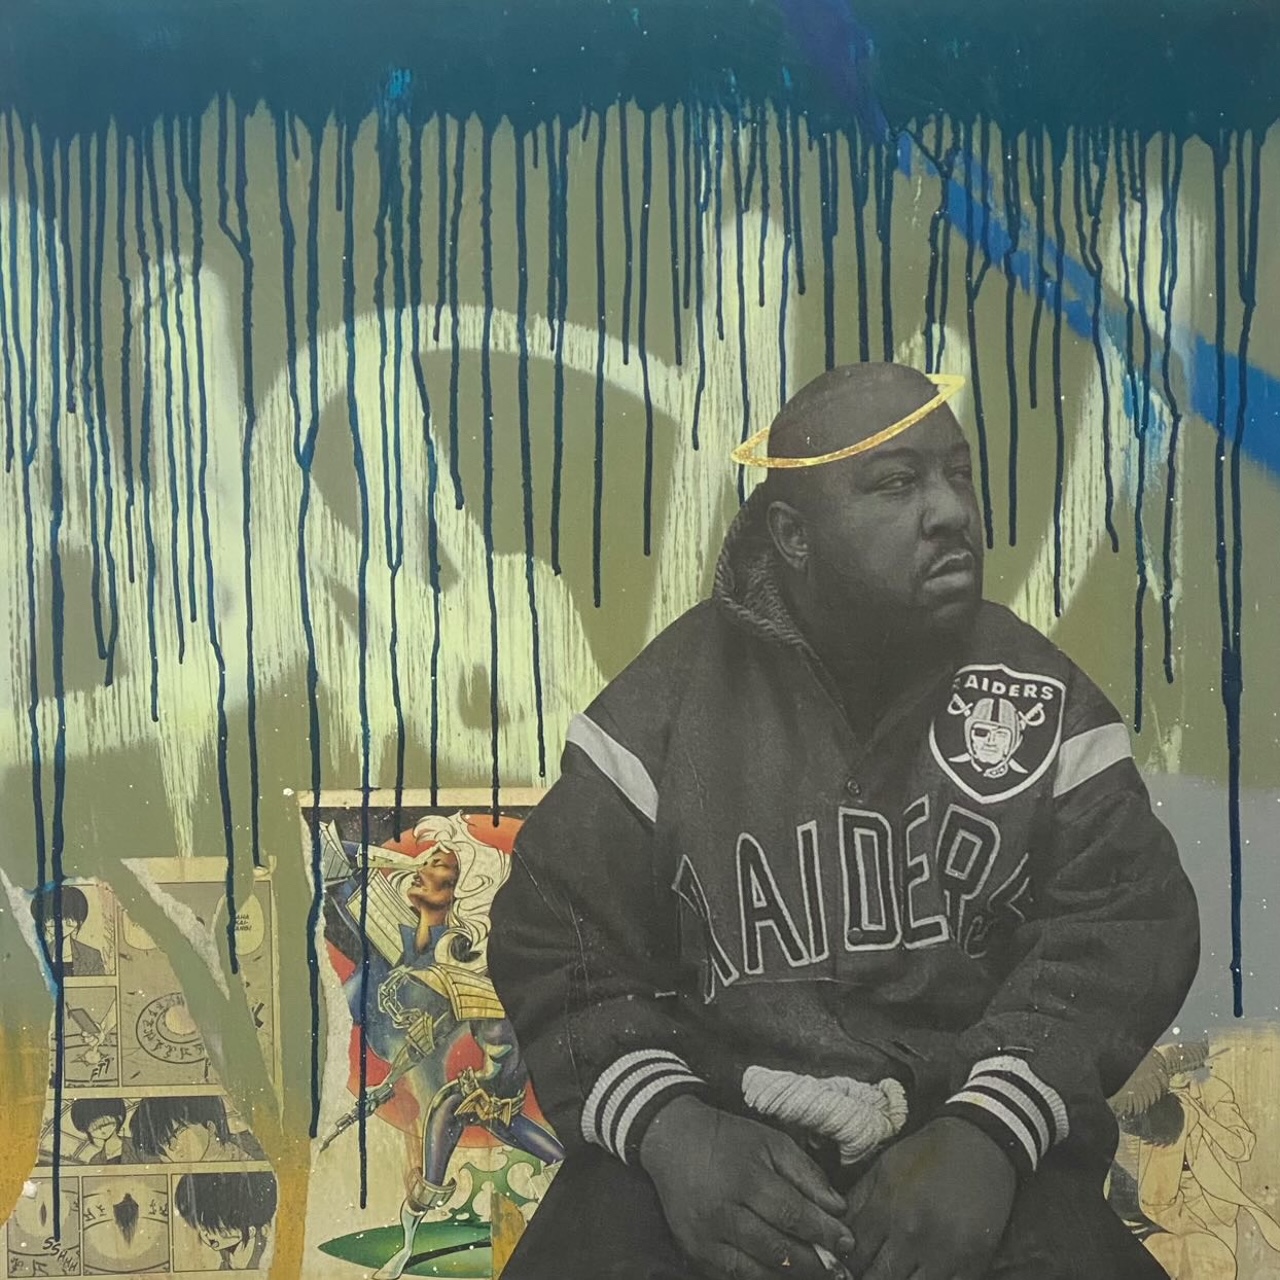 A collage with a photo of the Jacka in a Raiders jacket over a paint-drip background.